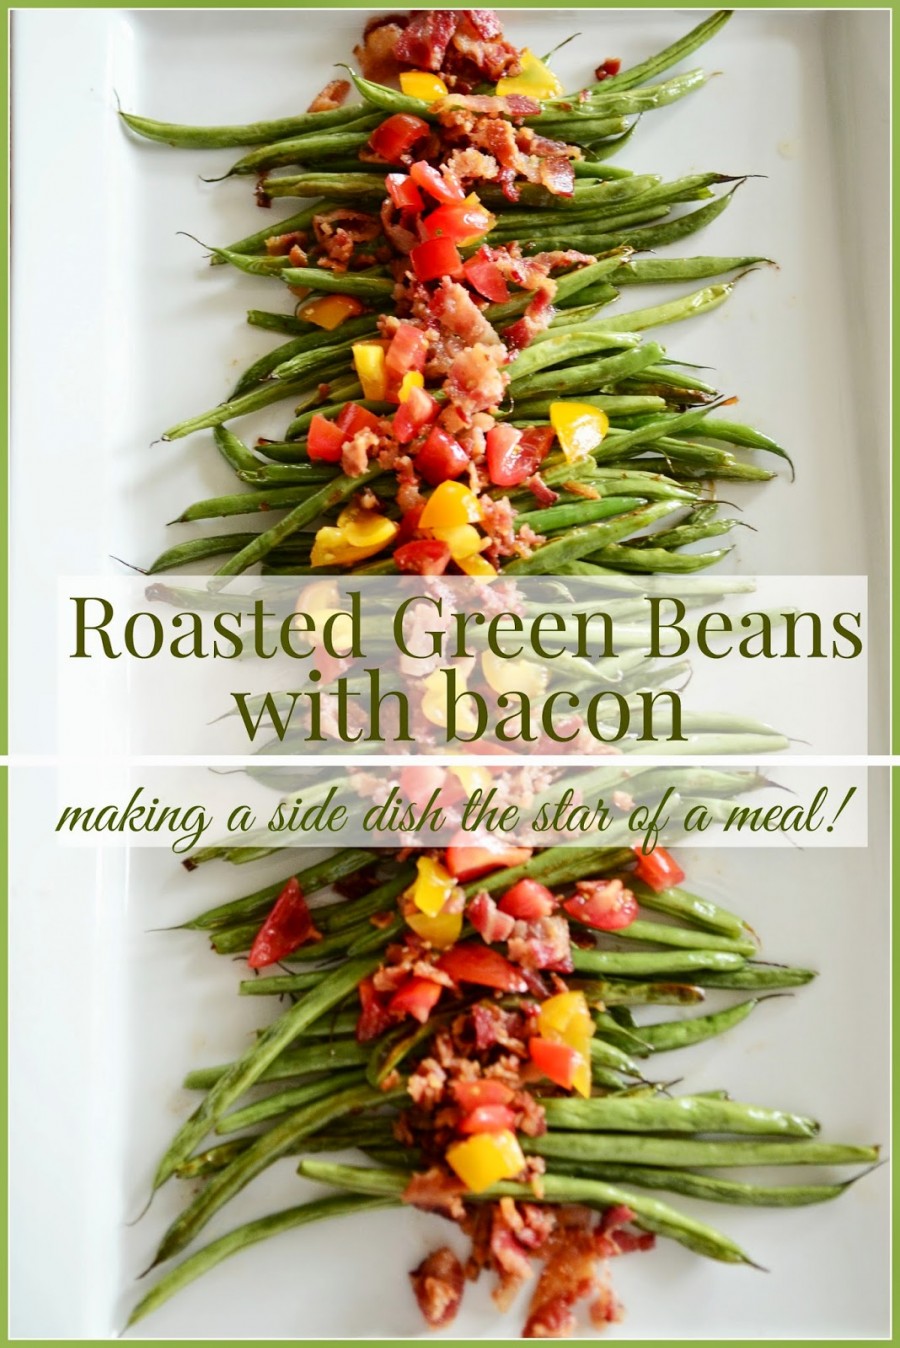 ROASTED GREEN BEANS WITH BACON… A MUST TRY!